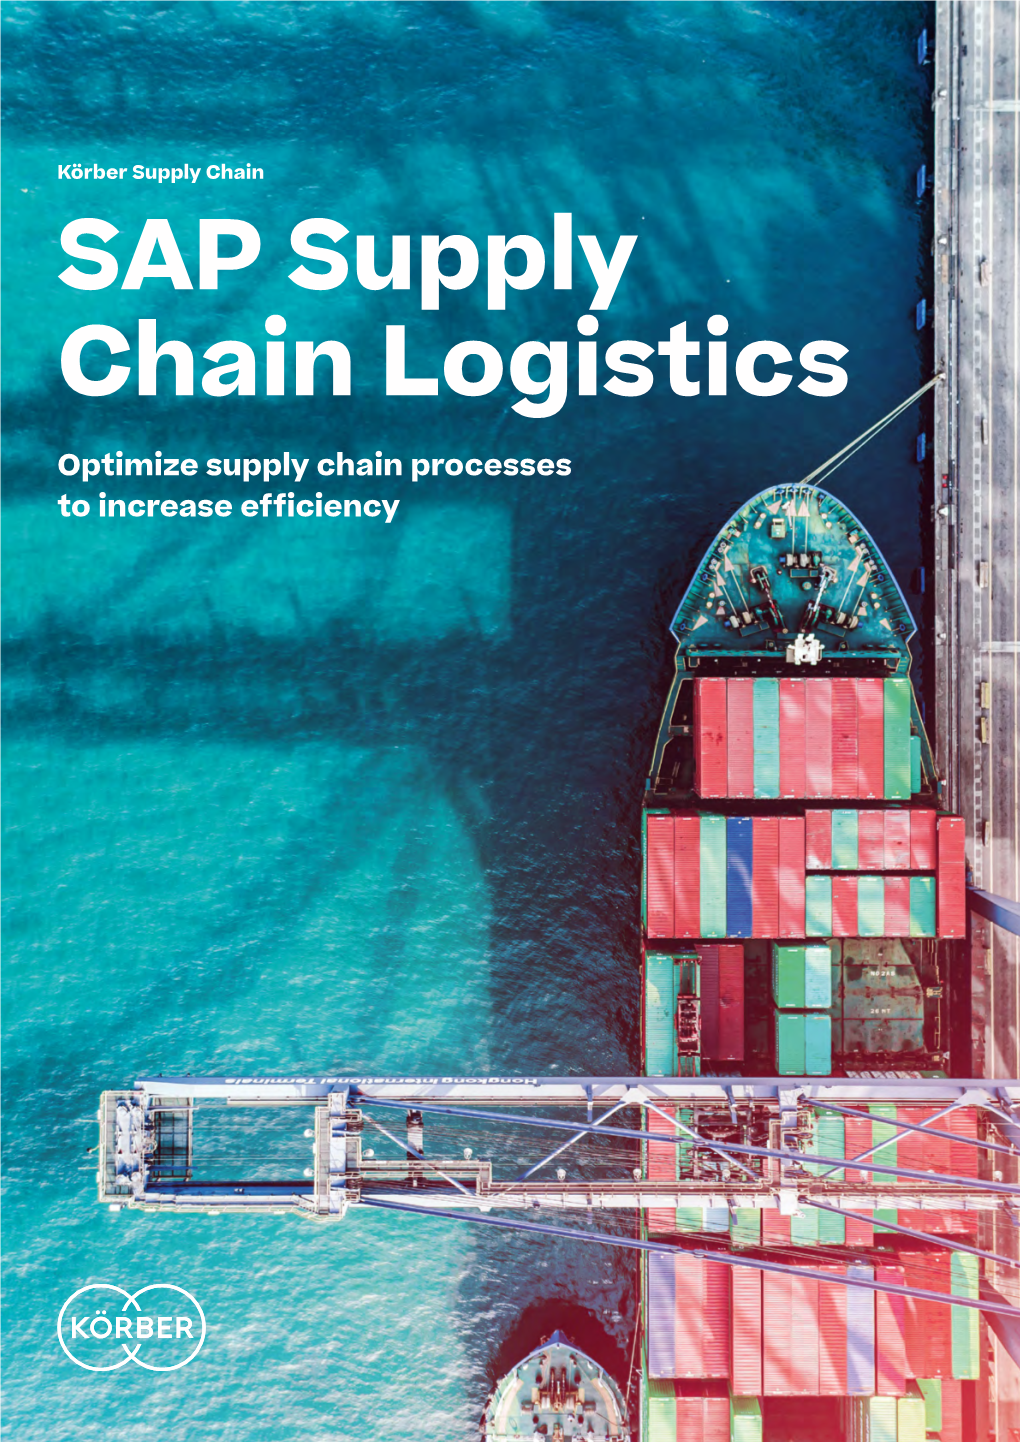 SAP Supply Chain Logistics Suite Offers Best-Of-Breed Solutions for SAP Supply Chain Expertise Each Operational Area